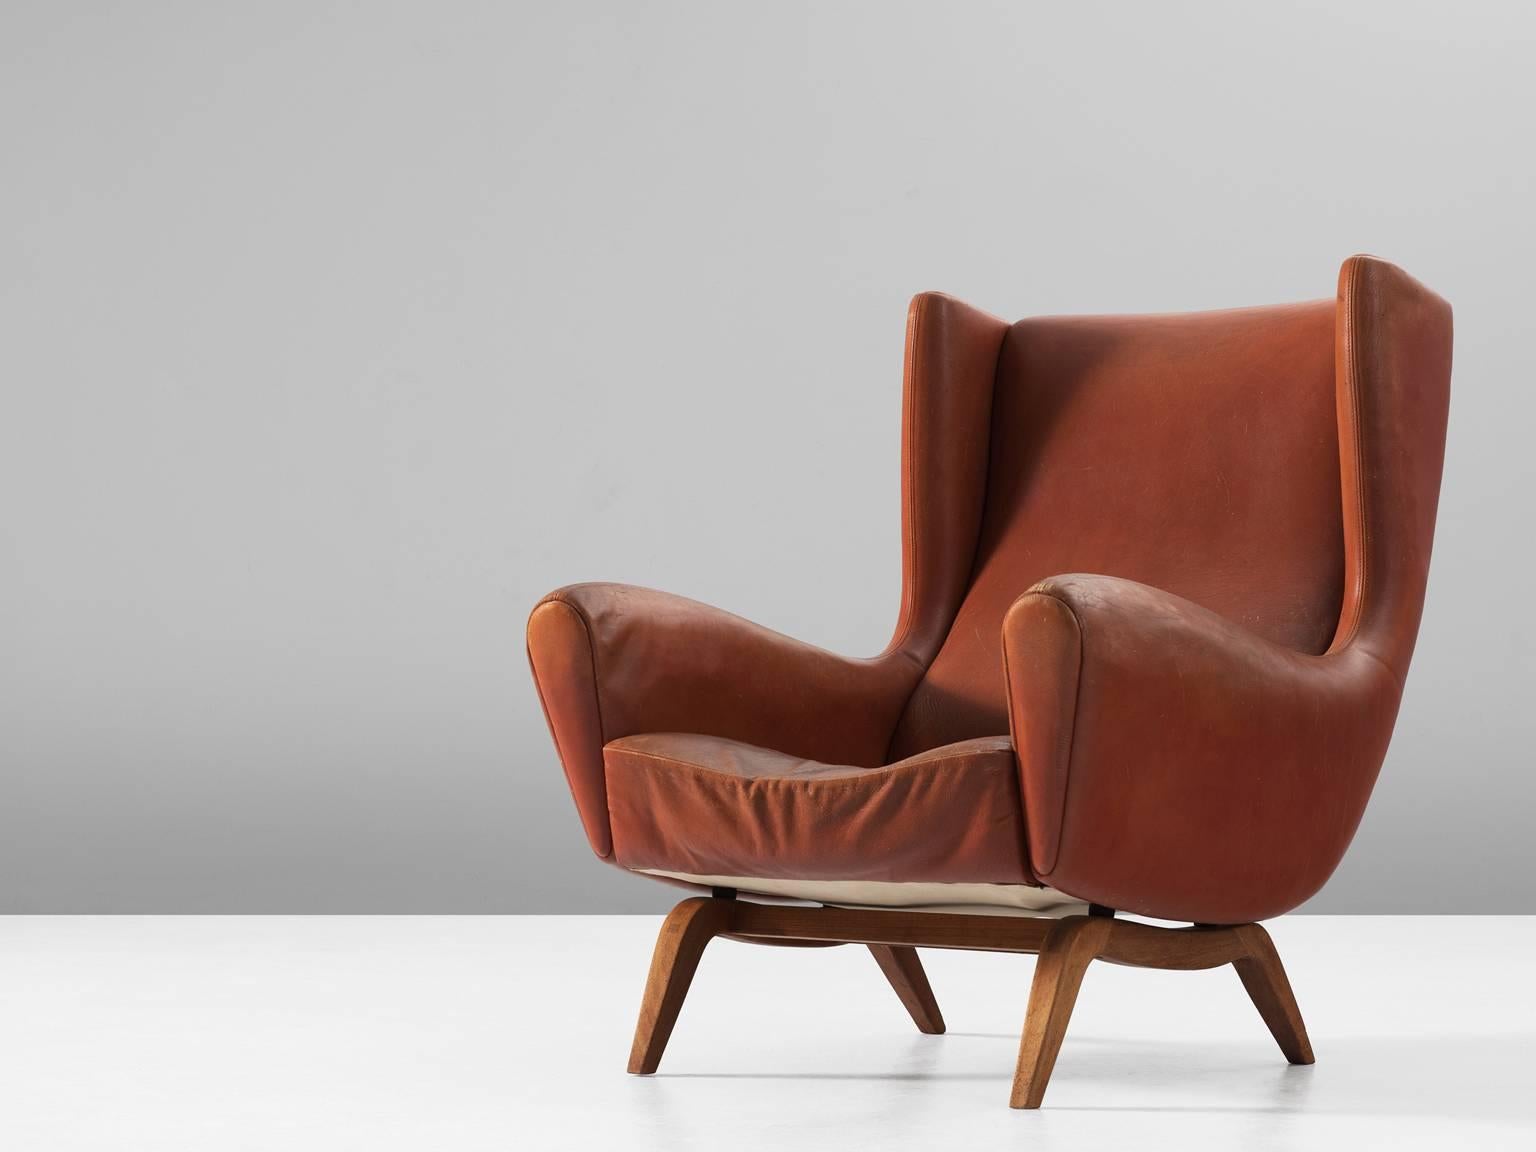 Illum Wikkelsø for Søren Willadsen, lounge chair model 110, leather and teak by Denmark, 1950s.

This well designed armchair shows an unusual elegance and great eye for detail, combined with outstanding craftsmanship, which is characteristic for